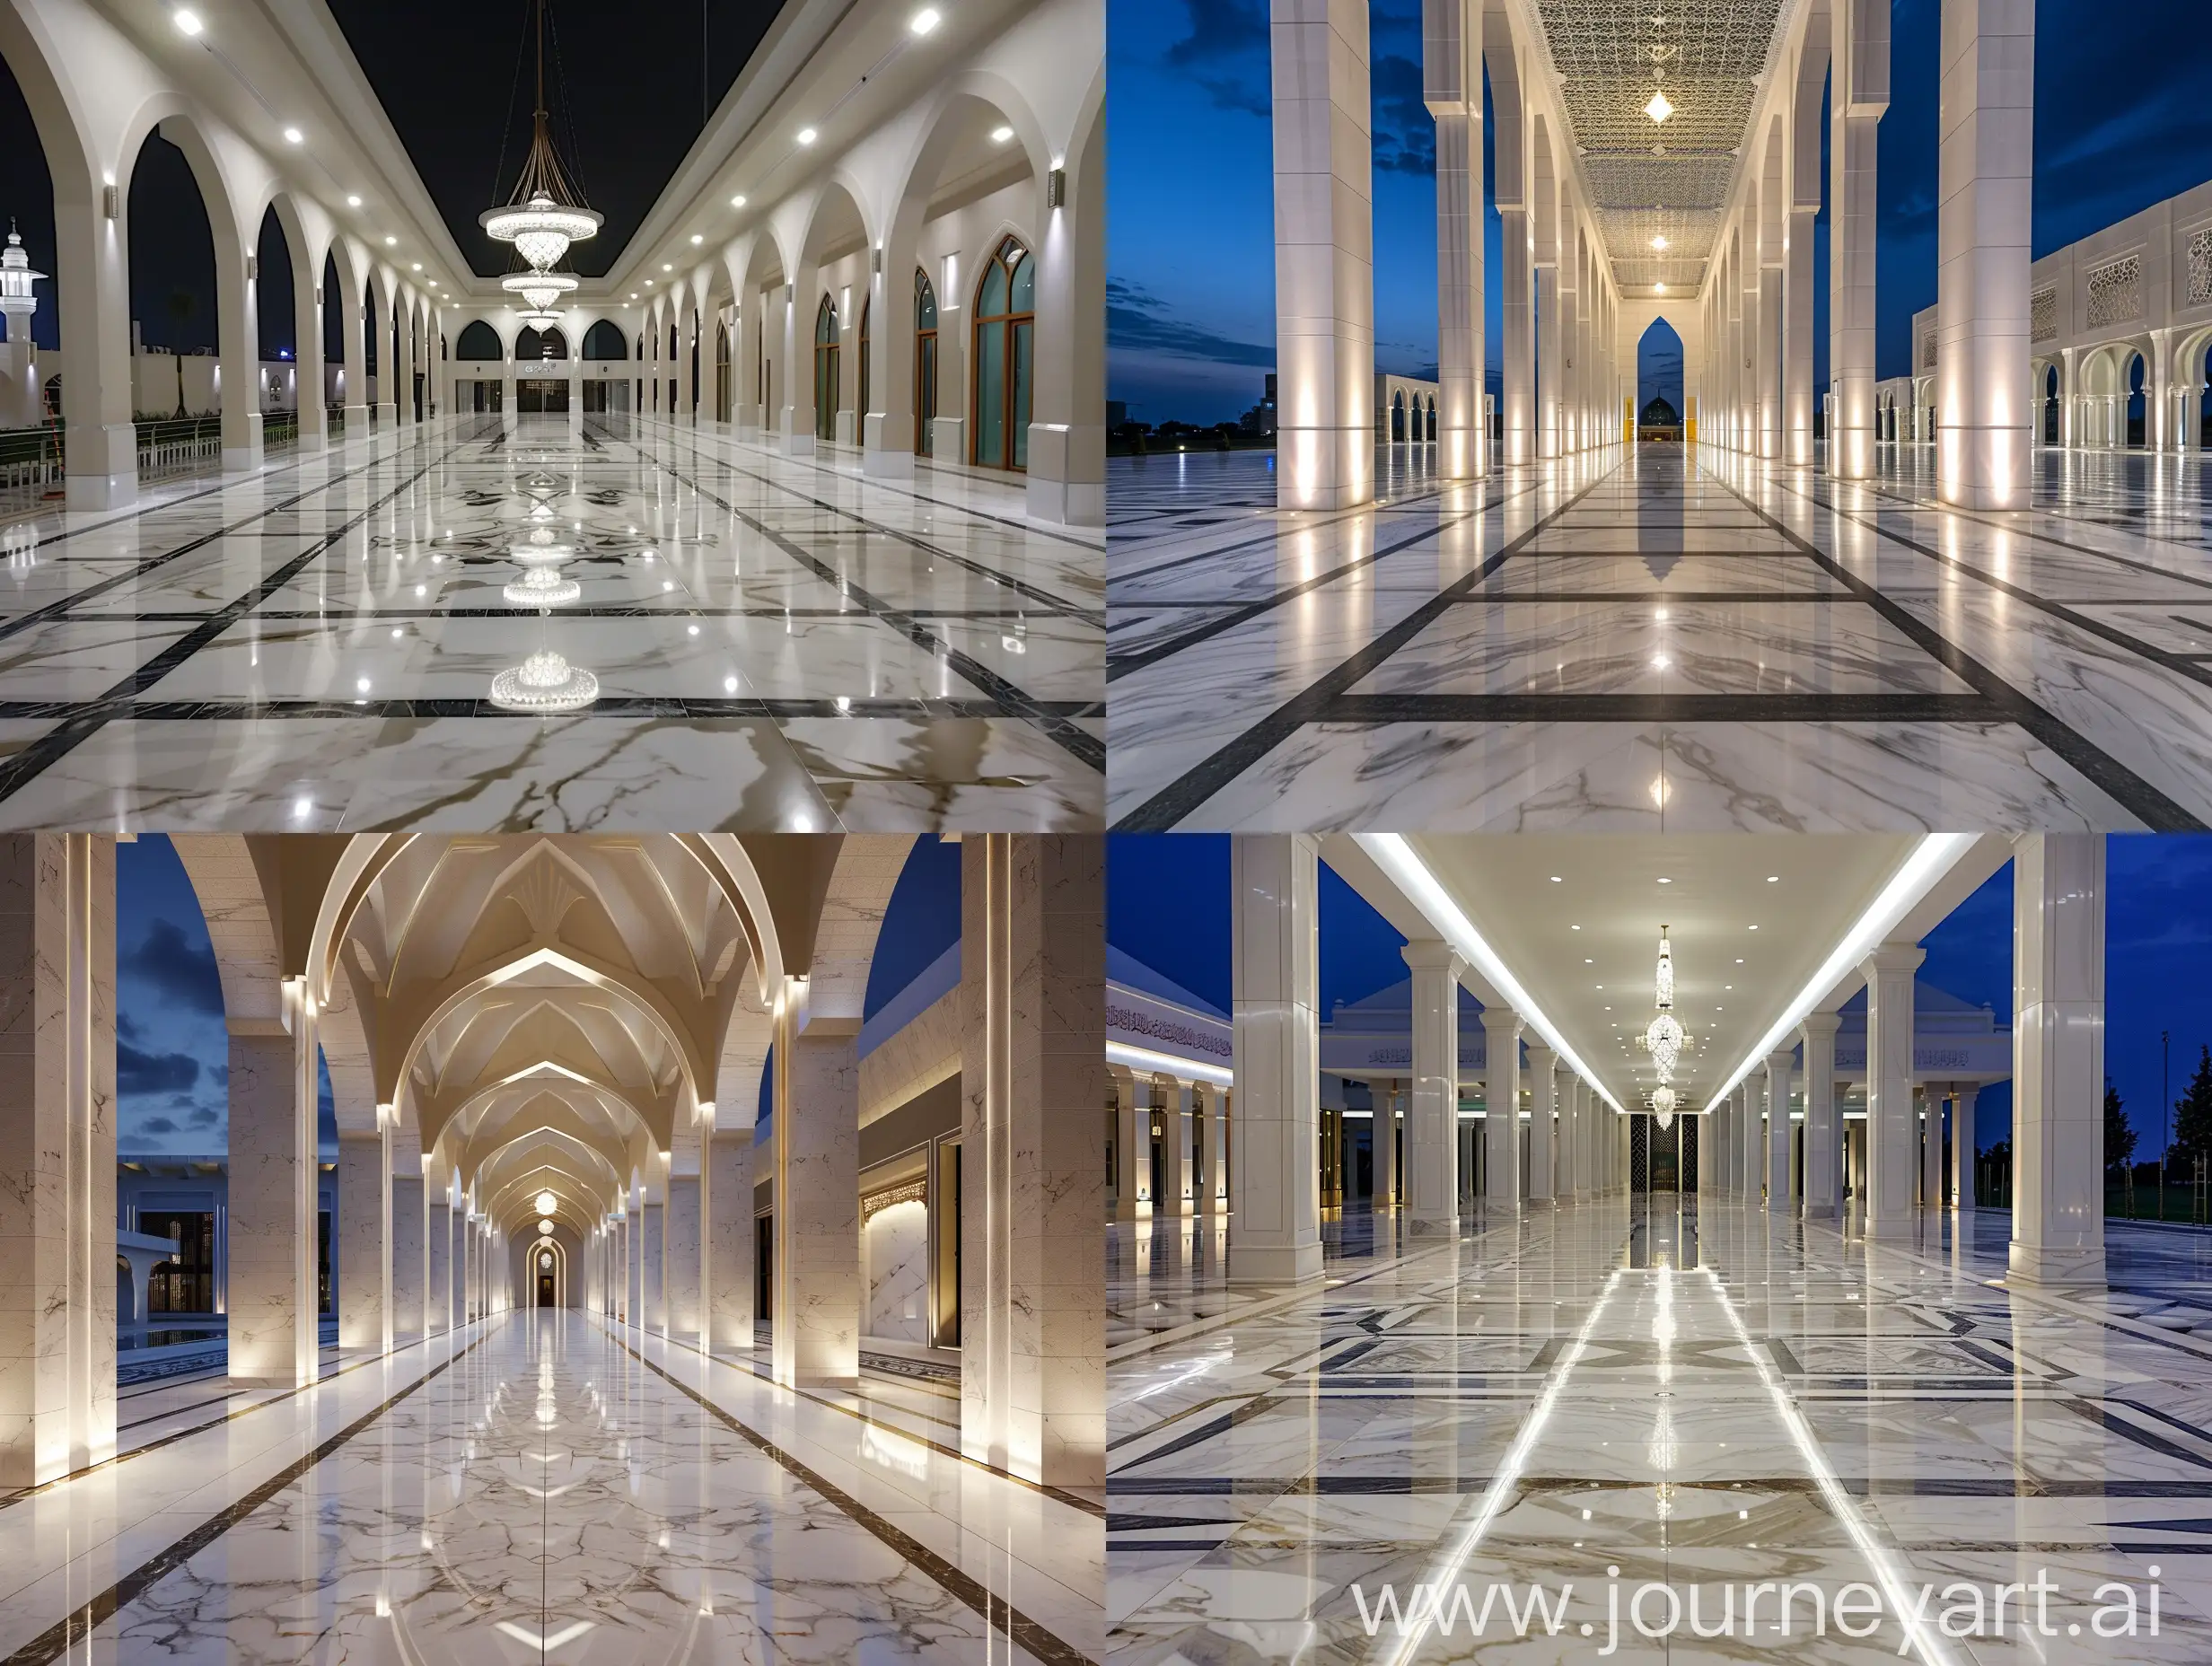 The marble floors shine at night in the corridors and complex the mosque. This mosque has a modern design with an open concept to attract the majority of Muslim and visitors